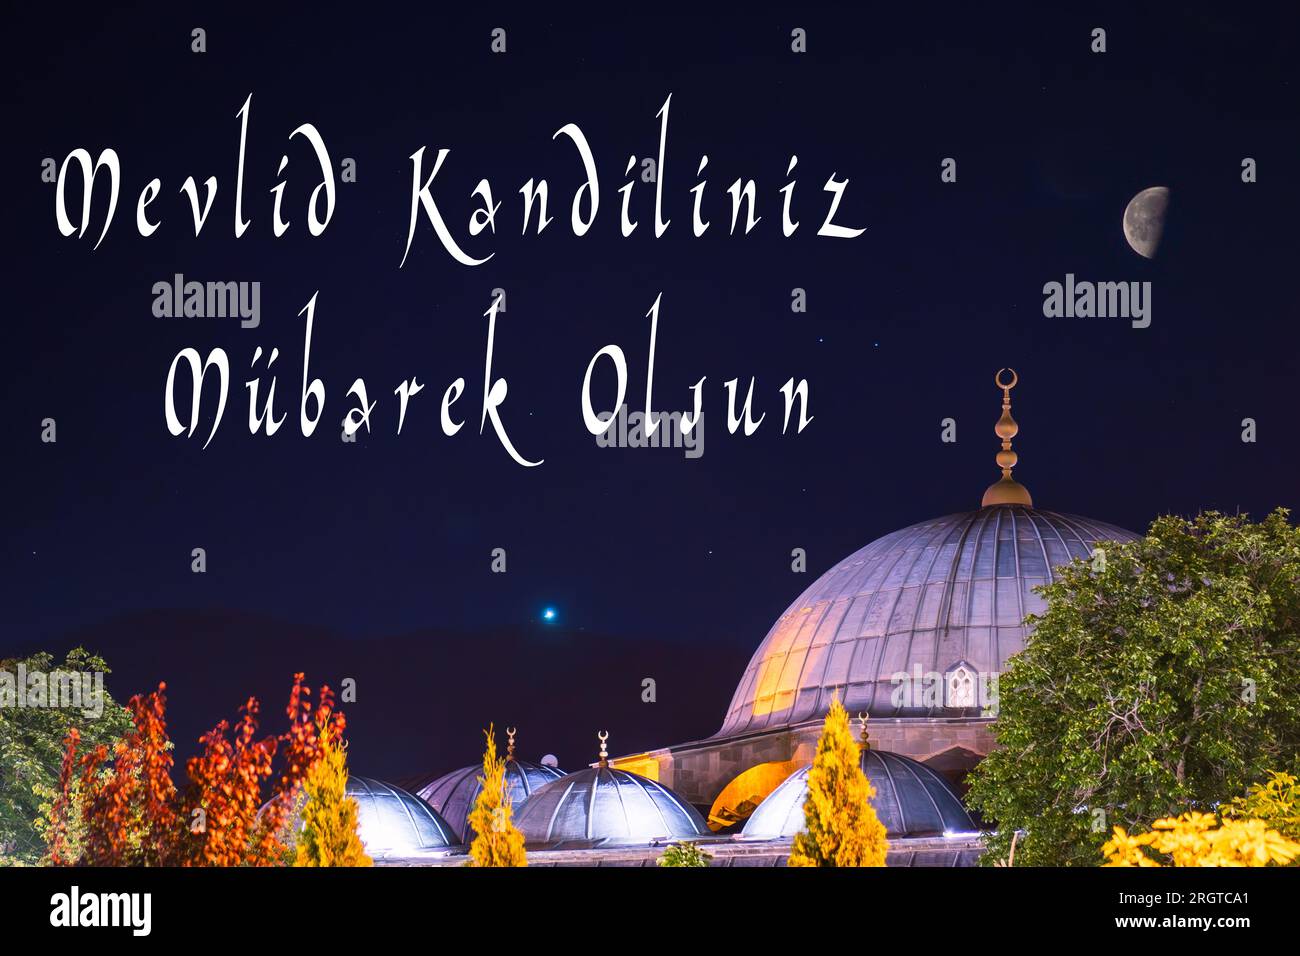 Mevlid Kandiliniz Mubarek Olsun. Lalapasa Mosque and half moon . text in the picture Have a Blessed Mawlid. Stock Photo